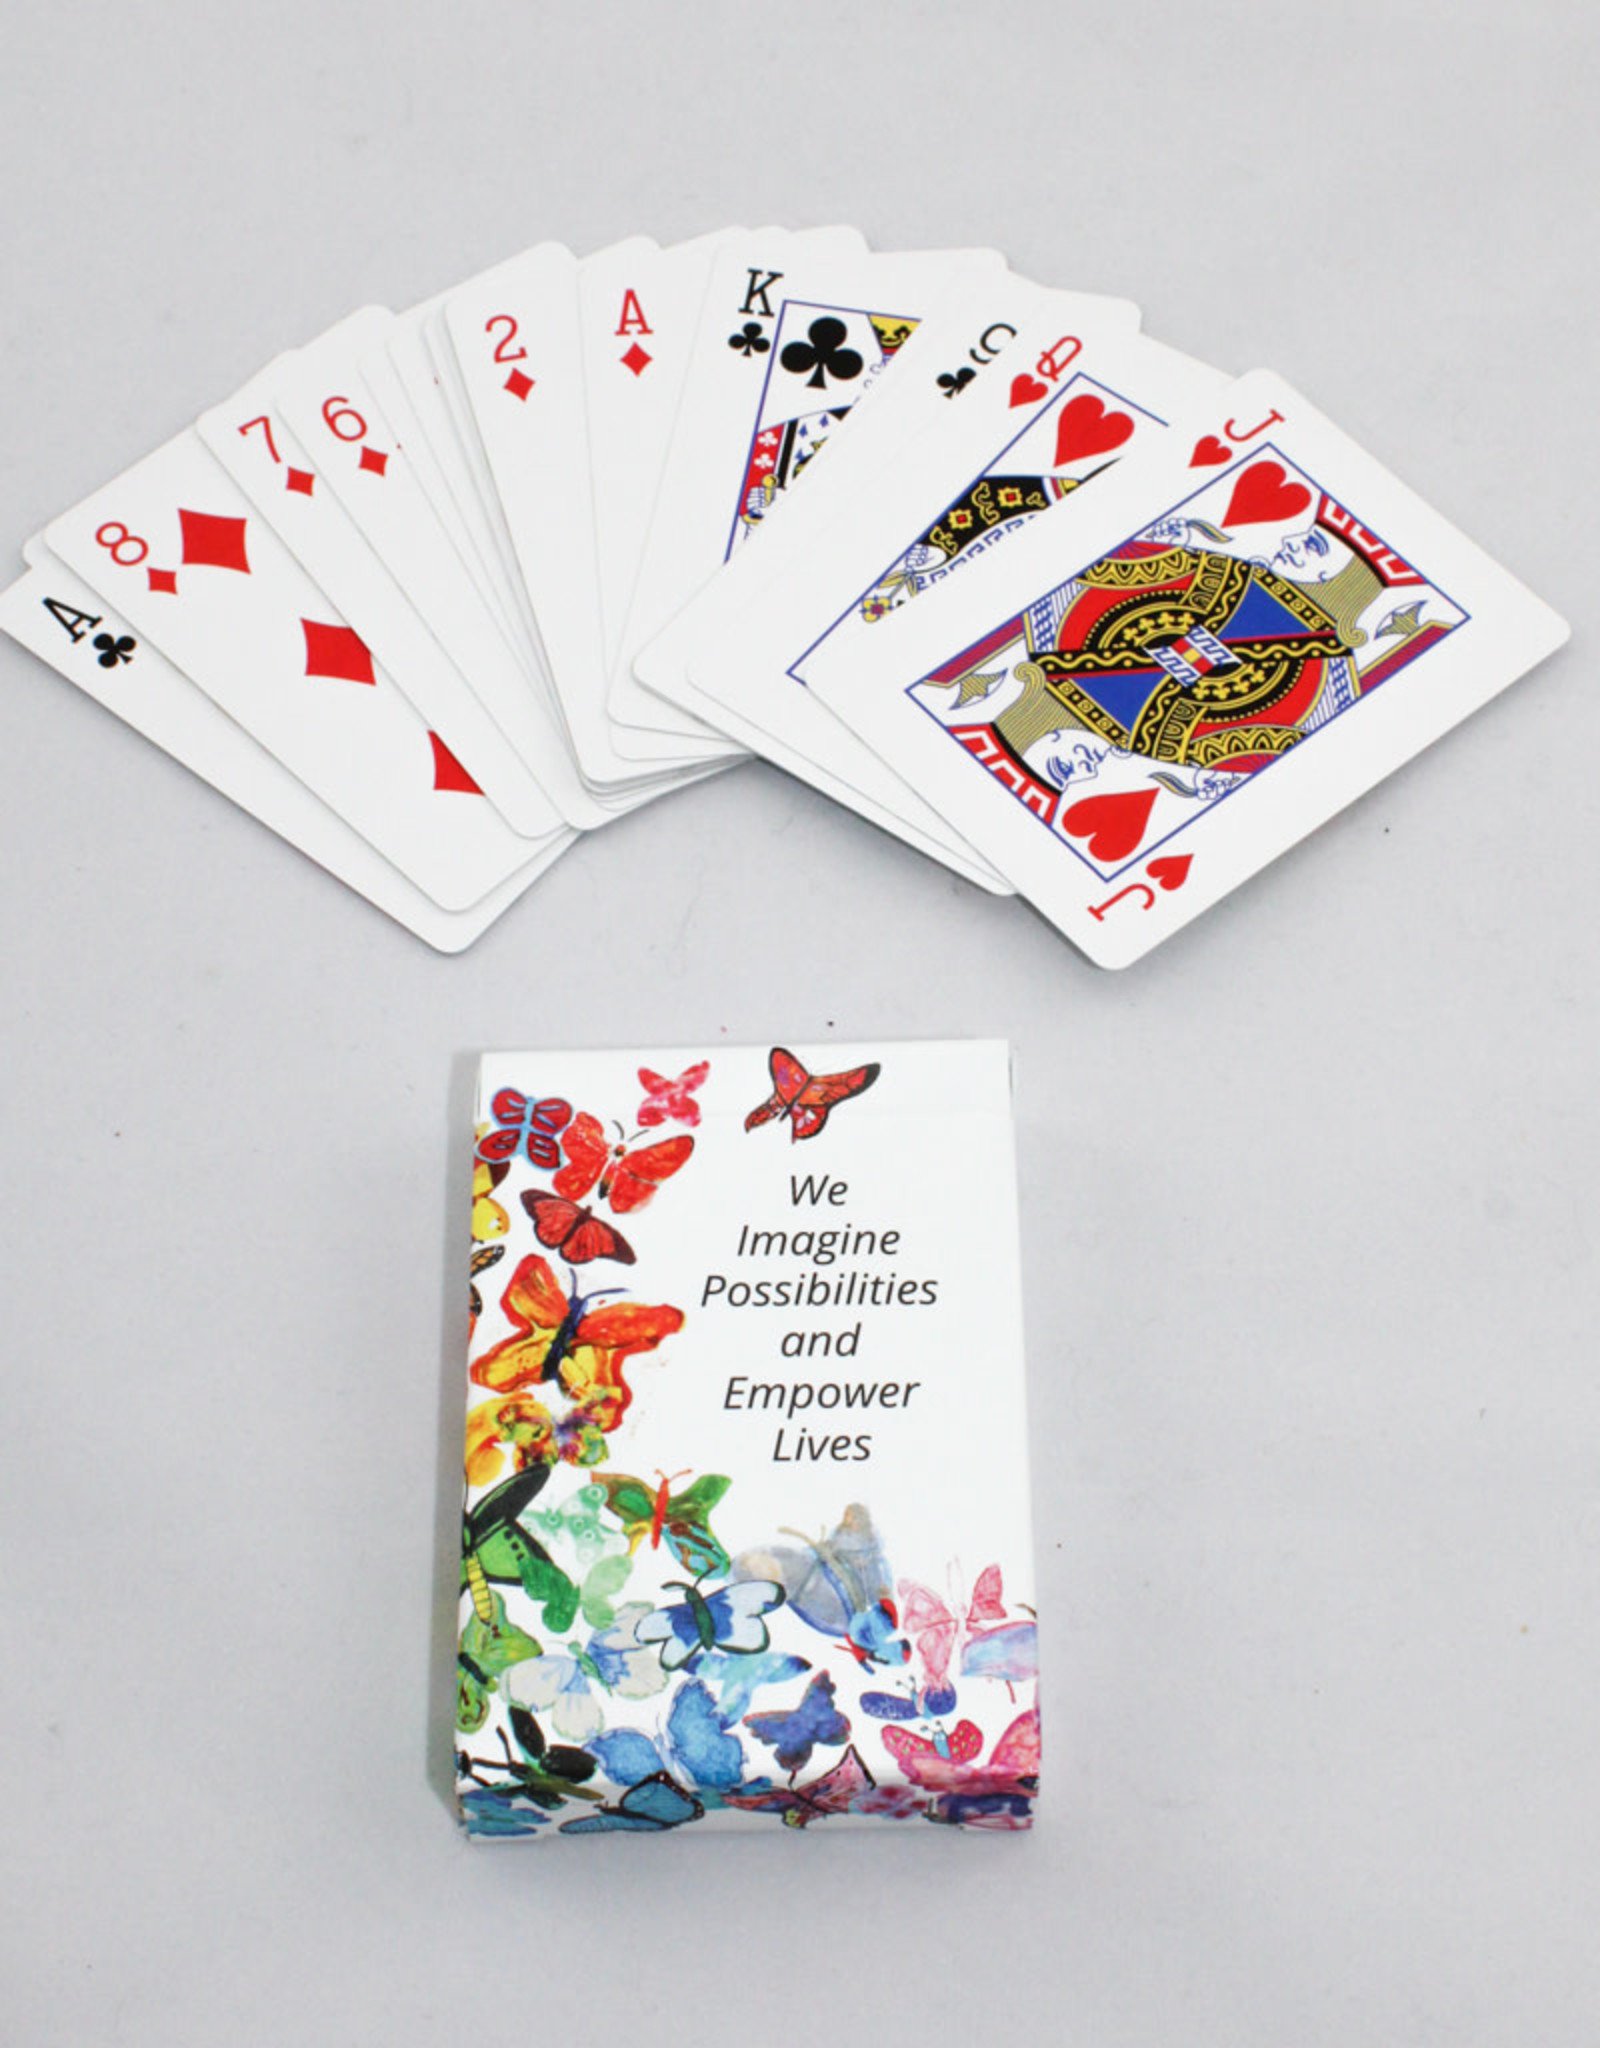 Vista Life Butterfly Playing Cards